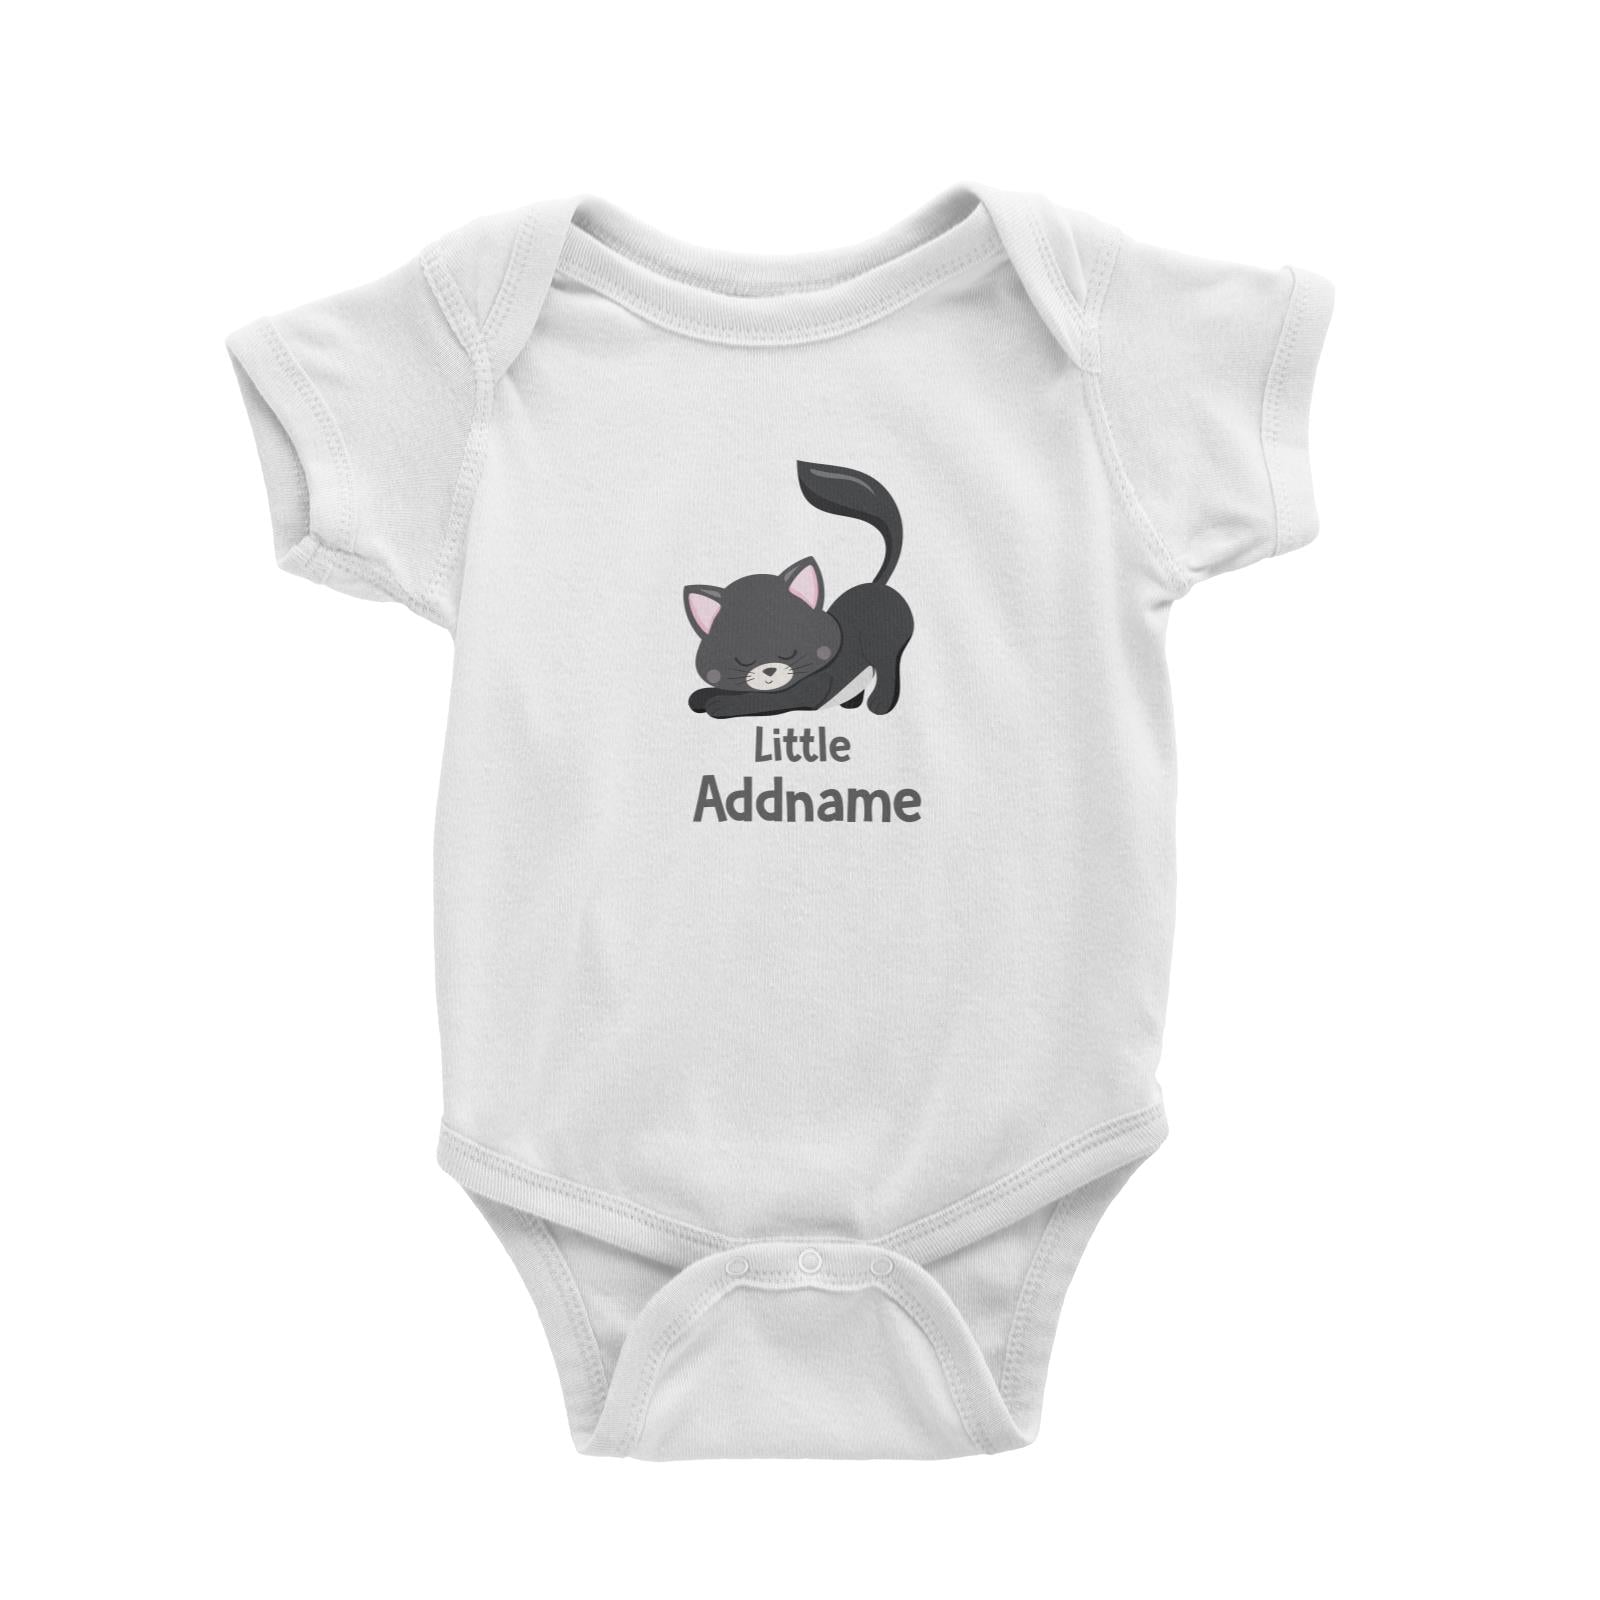 Adorable Cats Black Cat Little Addname White Baby Romper